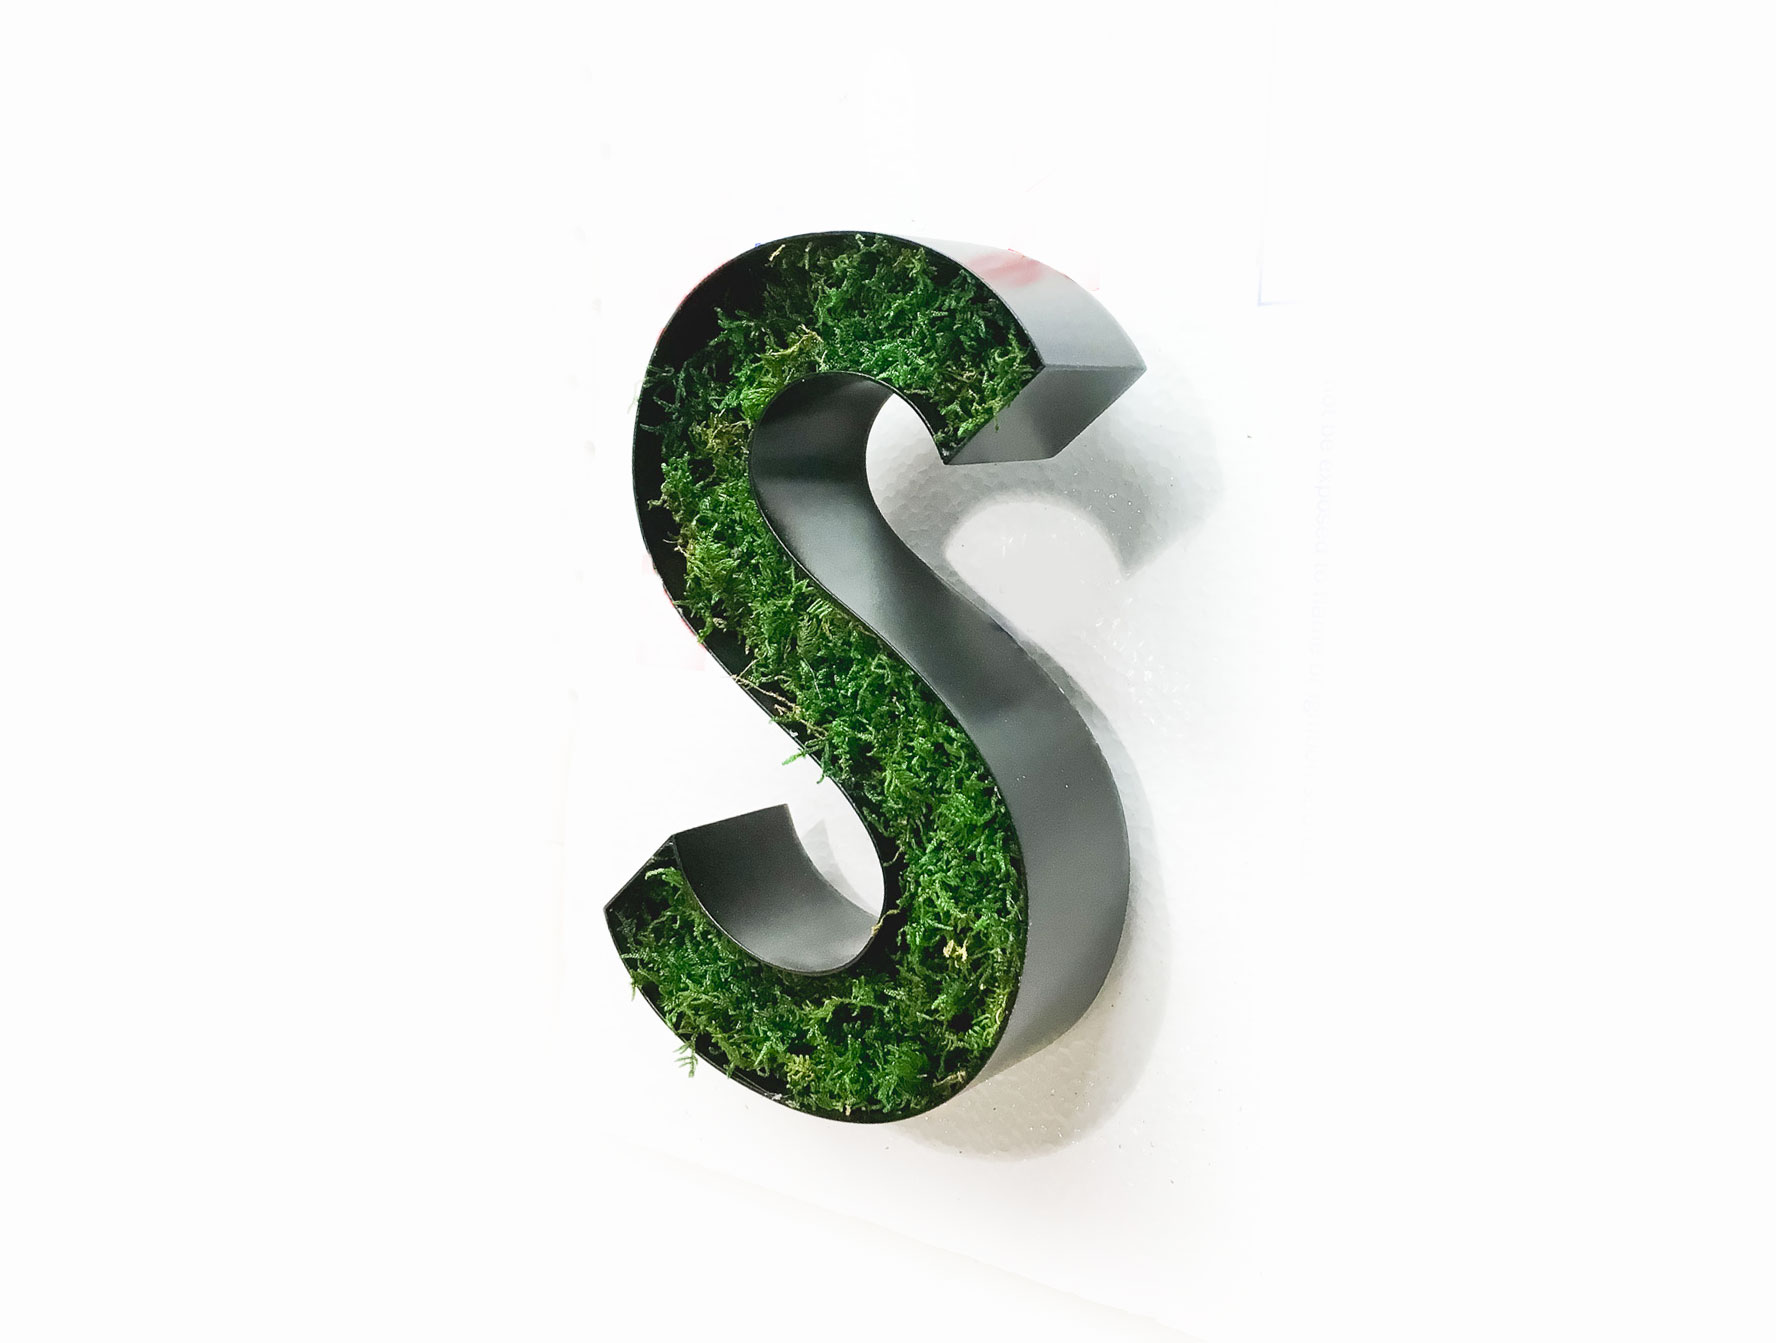 Two-toned, moss filled letters for Science37, a mobile technology and clinical trial company.